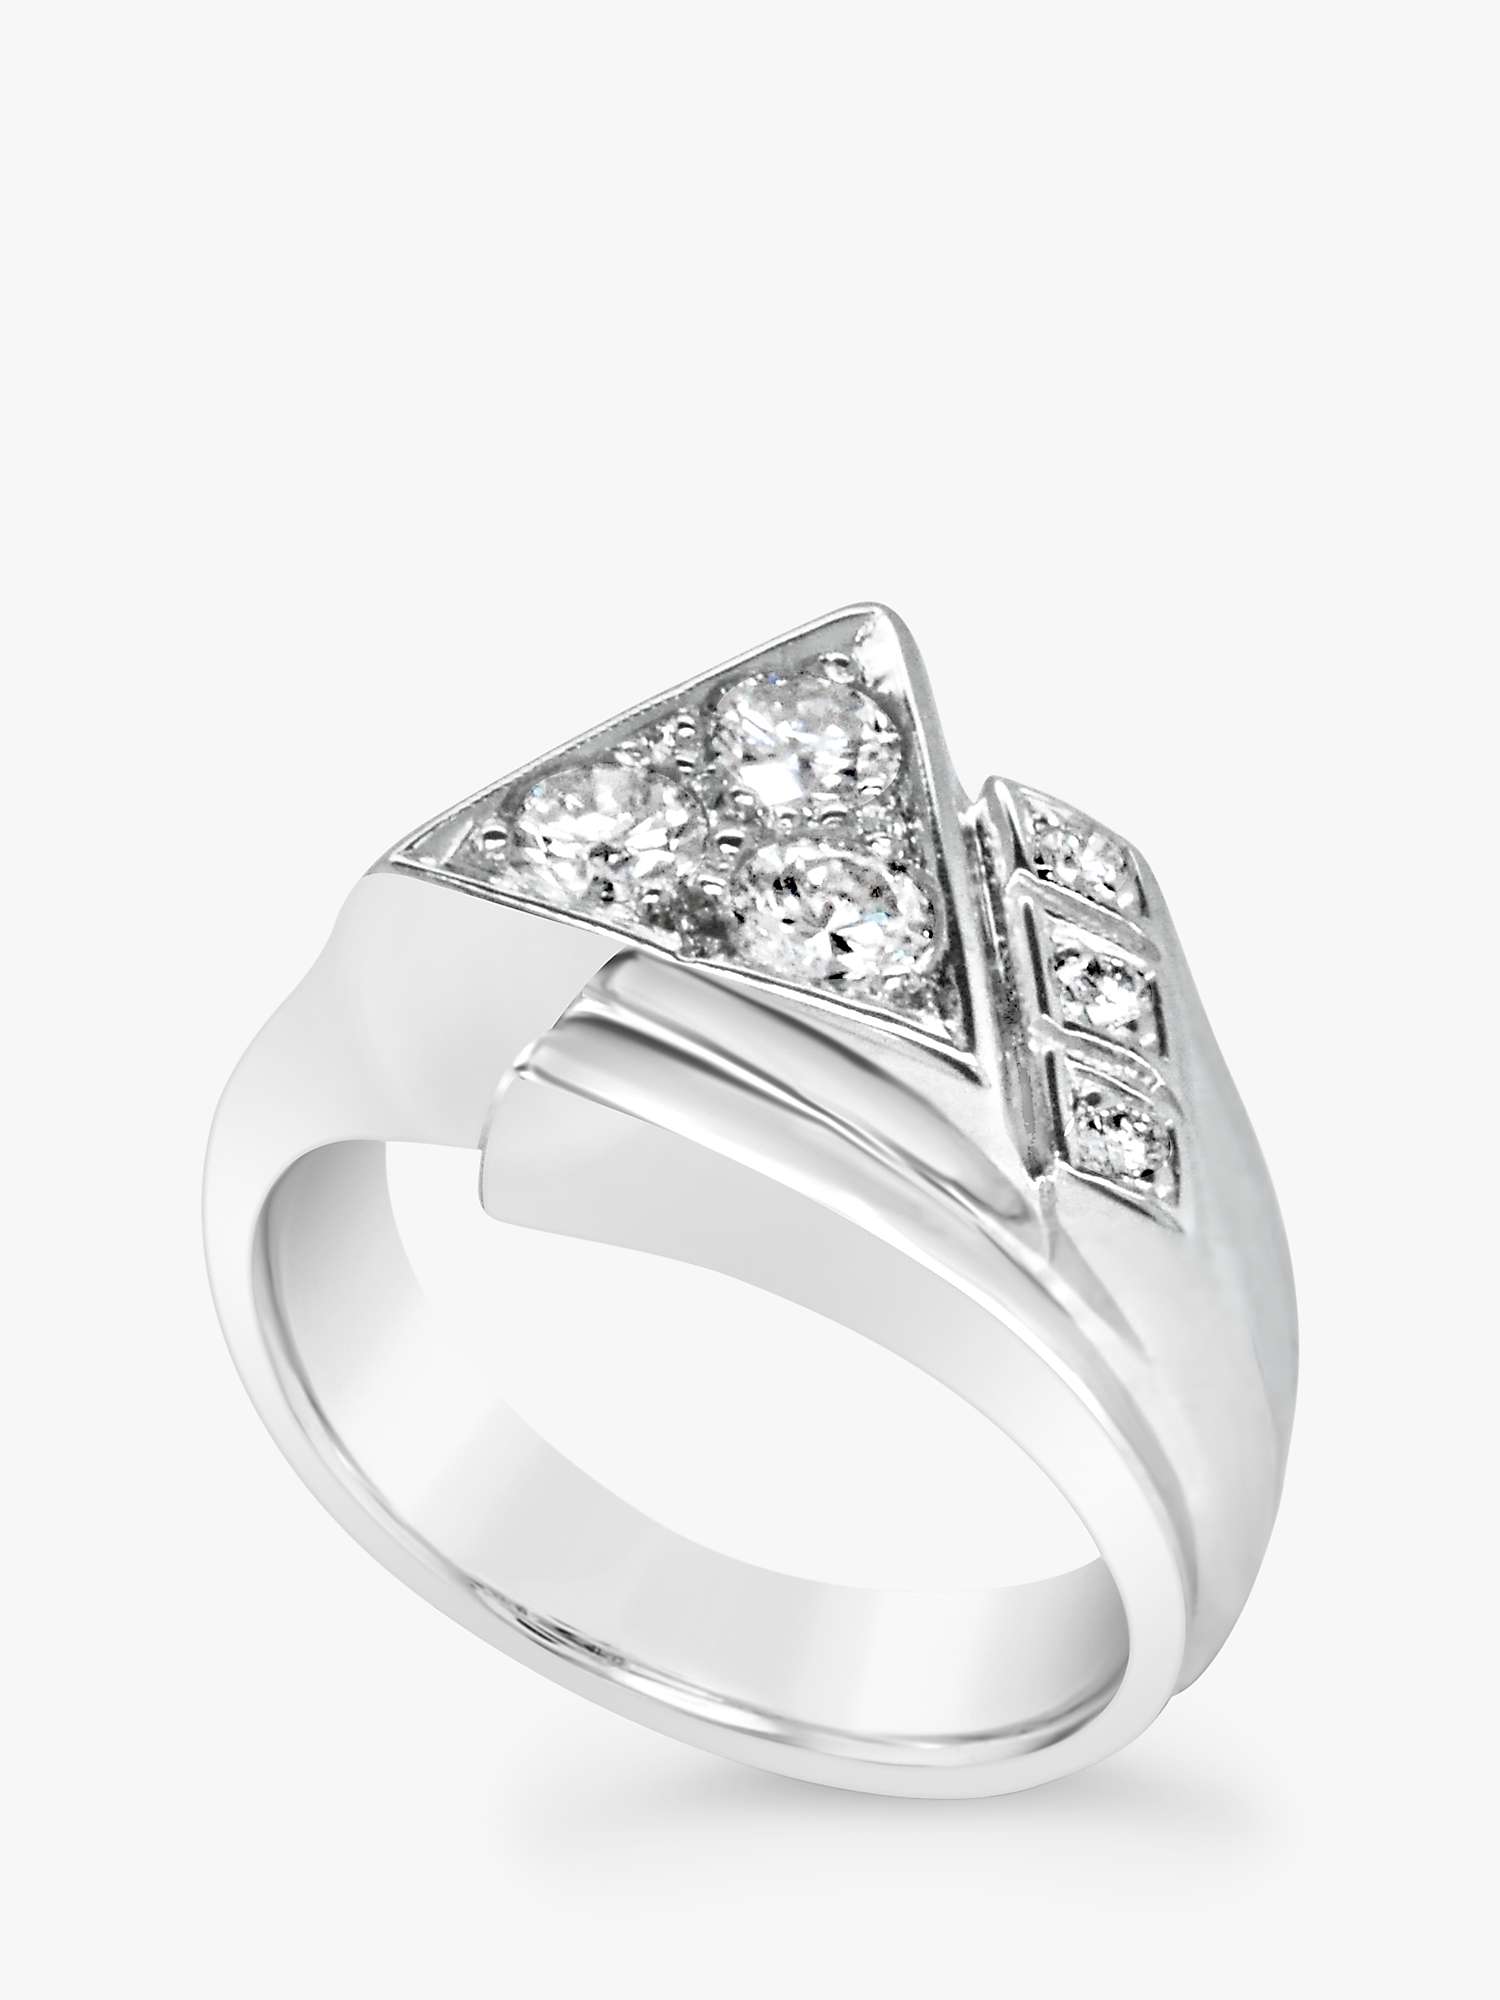 Buy Milton & Humble Jewellery Second Hand 18ct White Gold Diamond Cocktail Ring Online at johnlewis.com